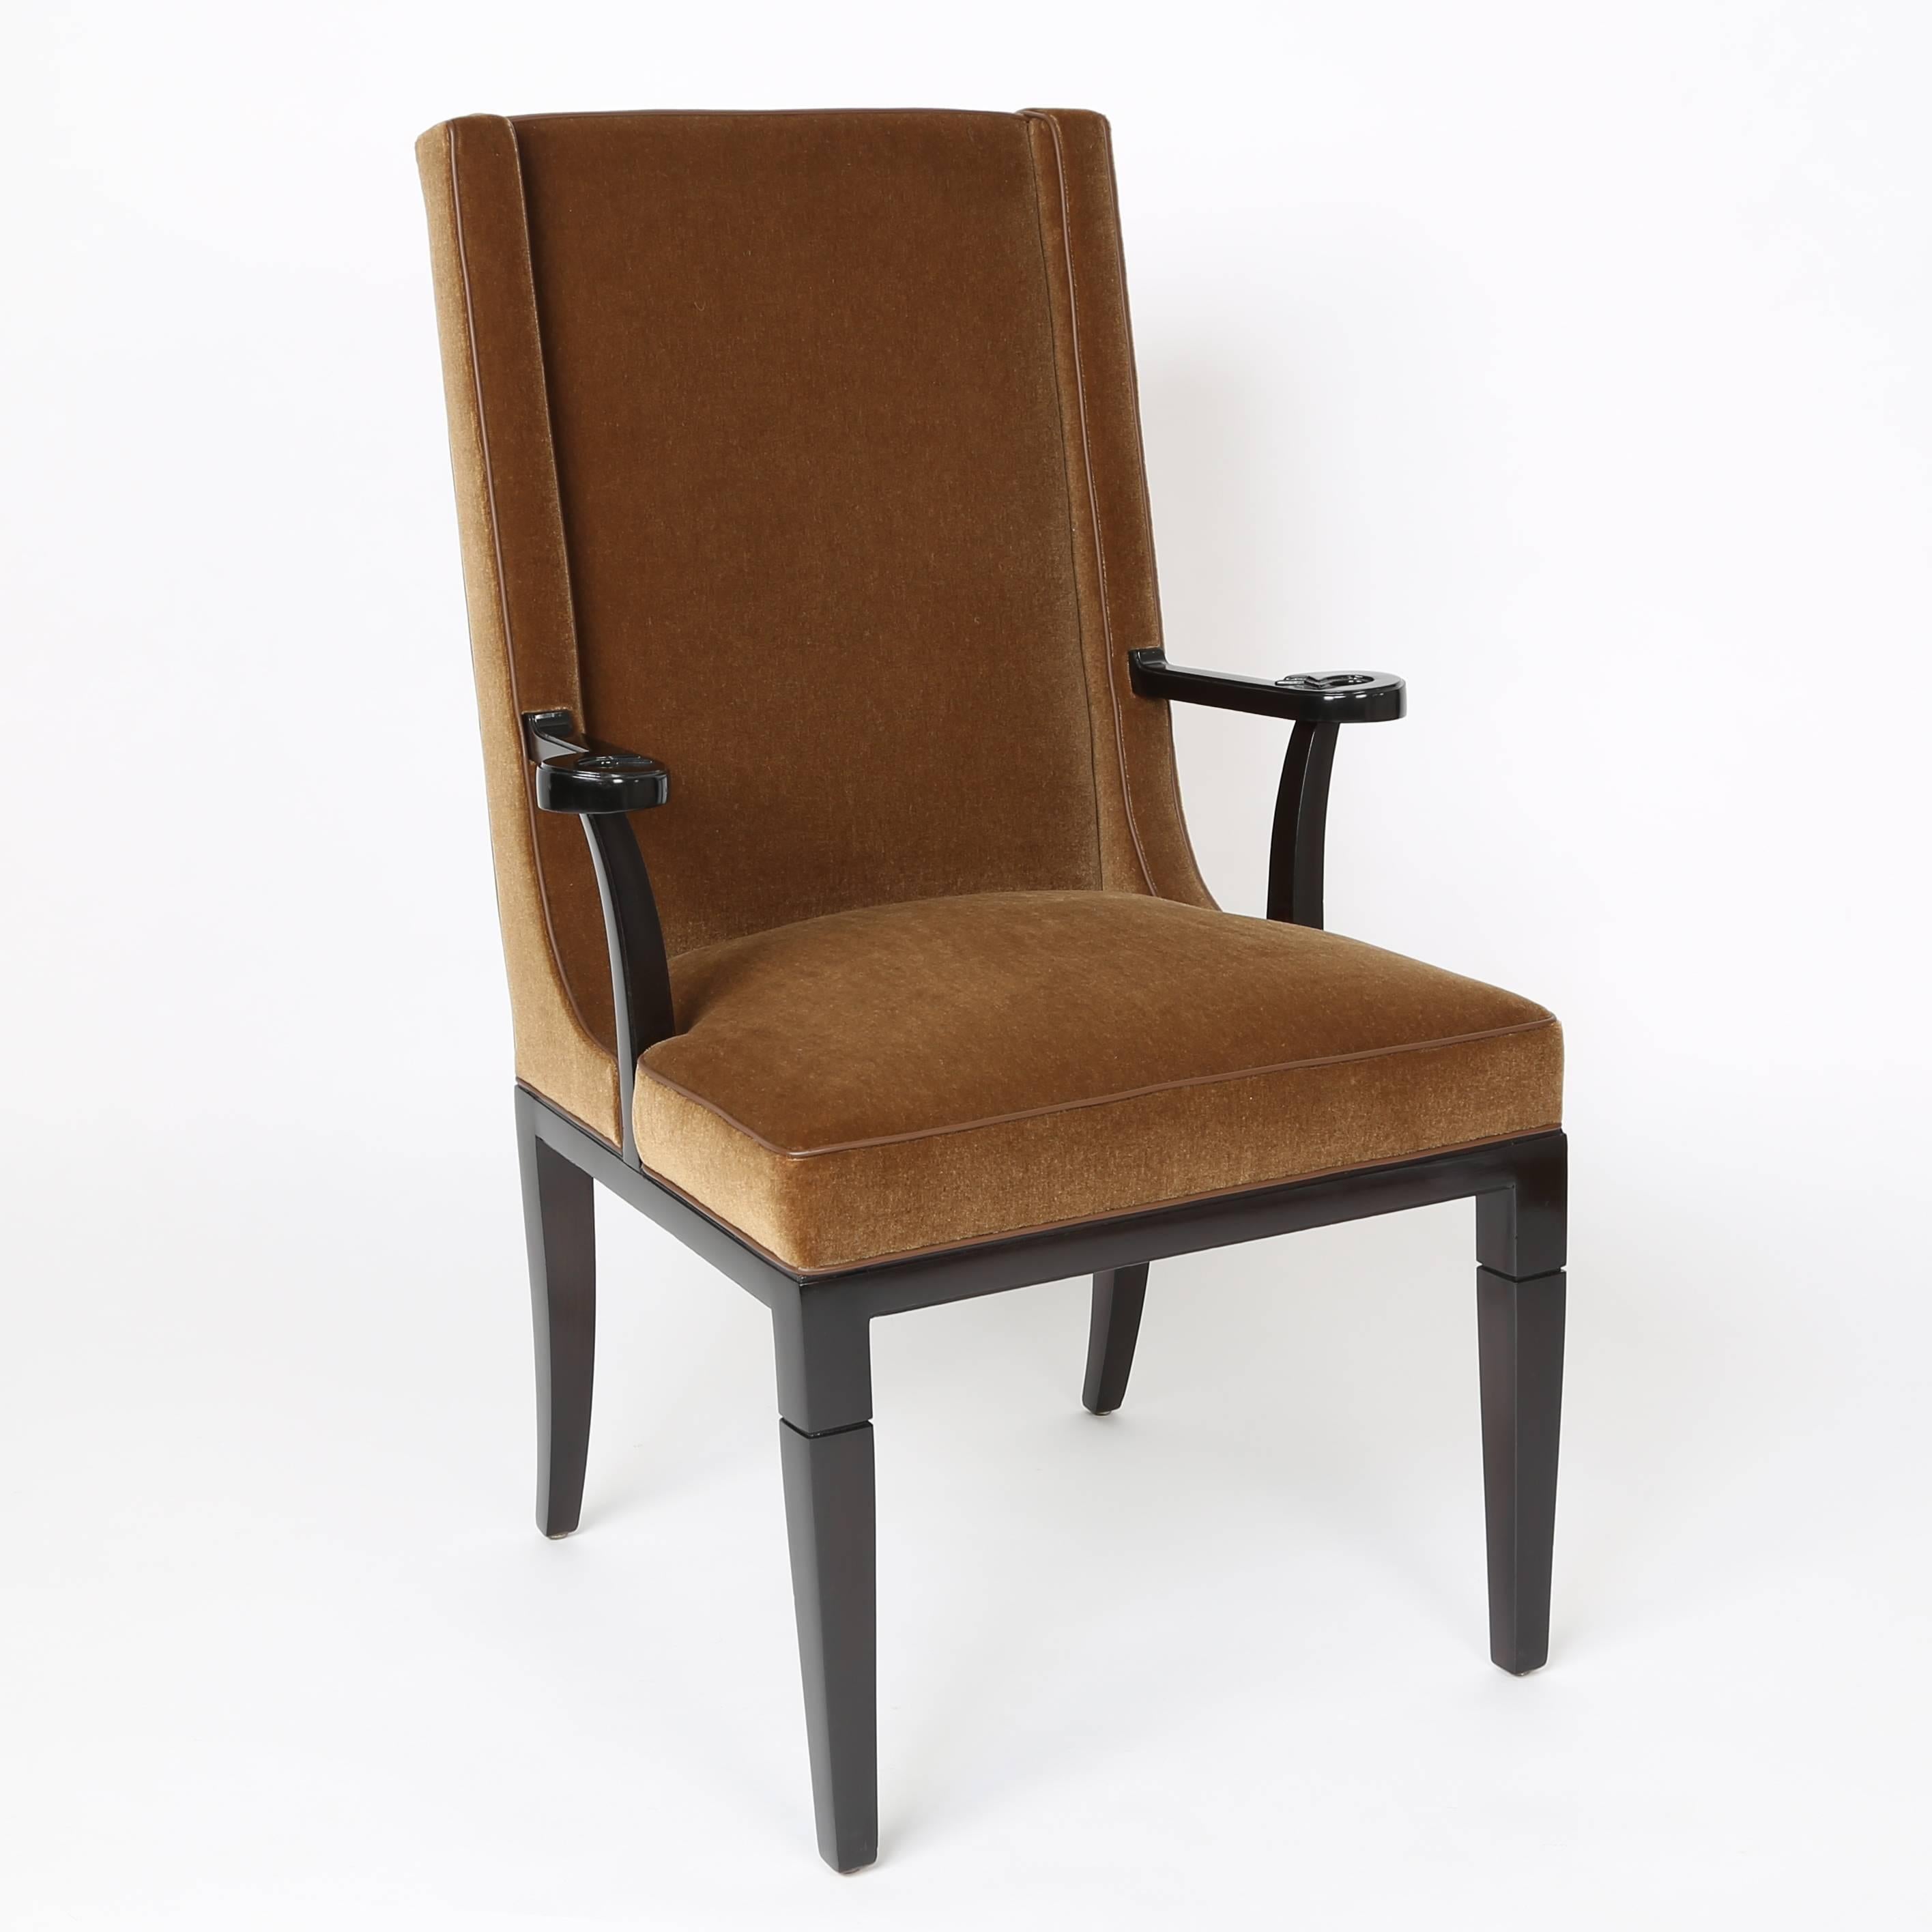 Mid-20th Century Pair of Armchairs by Tommi Parzinger for Charak Modern, circa 1940s For Sale